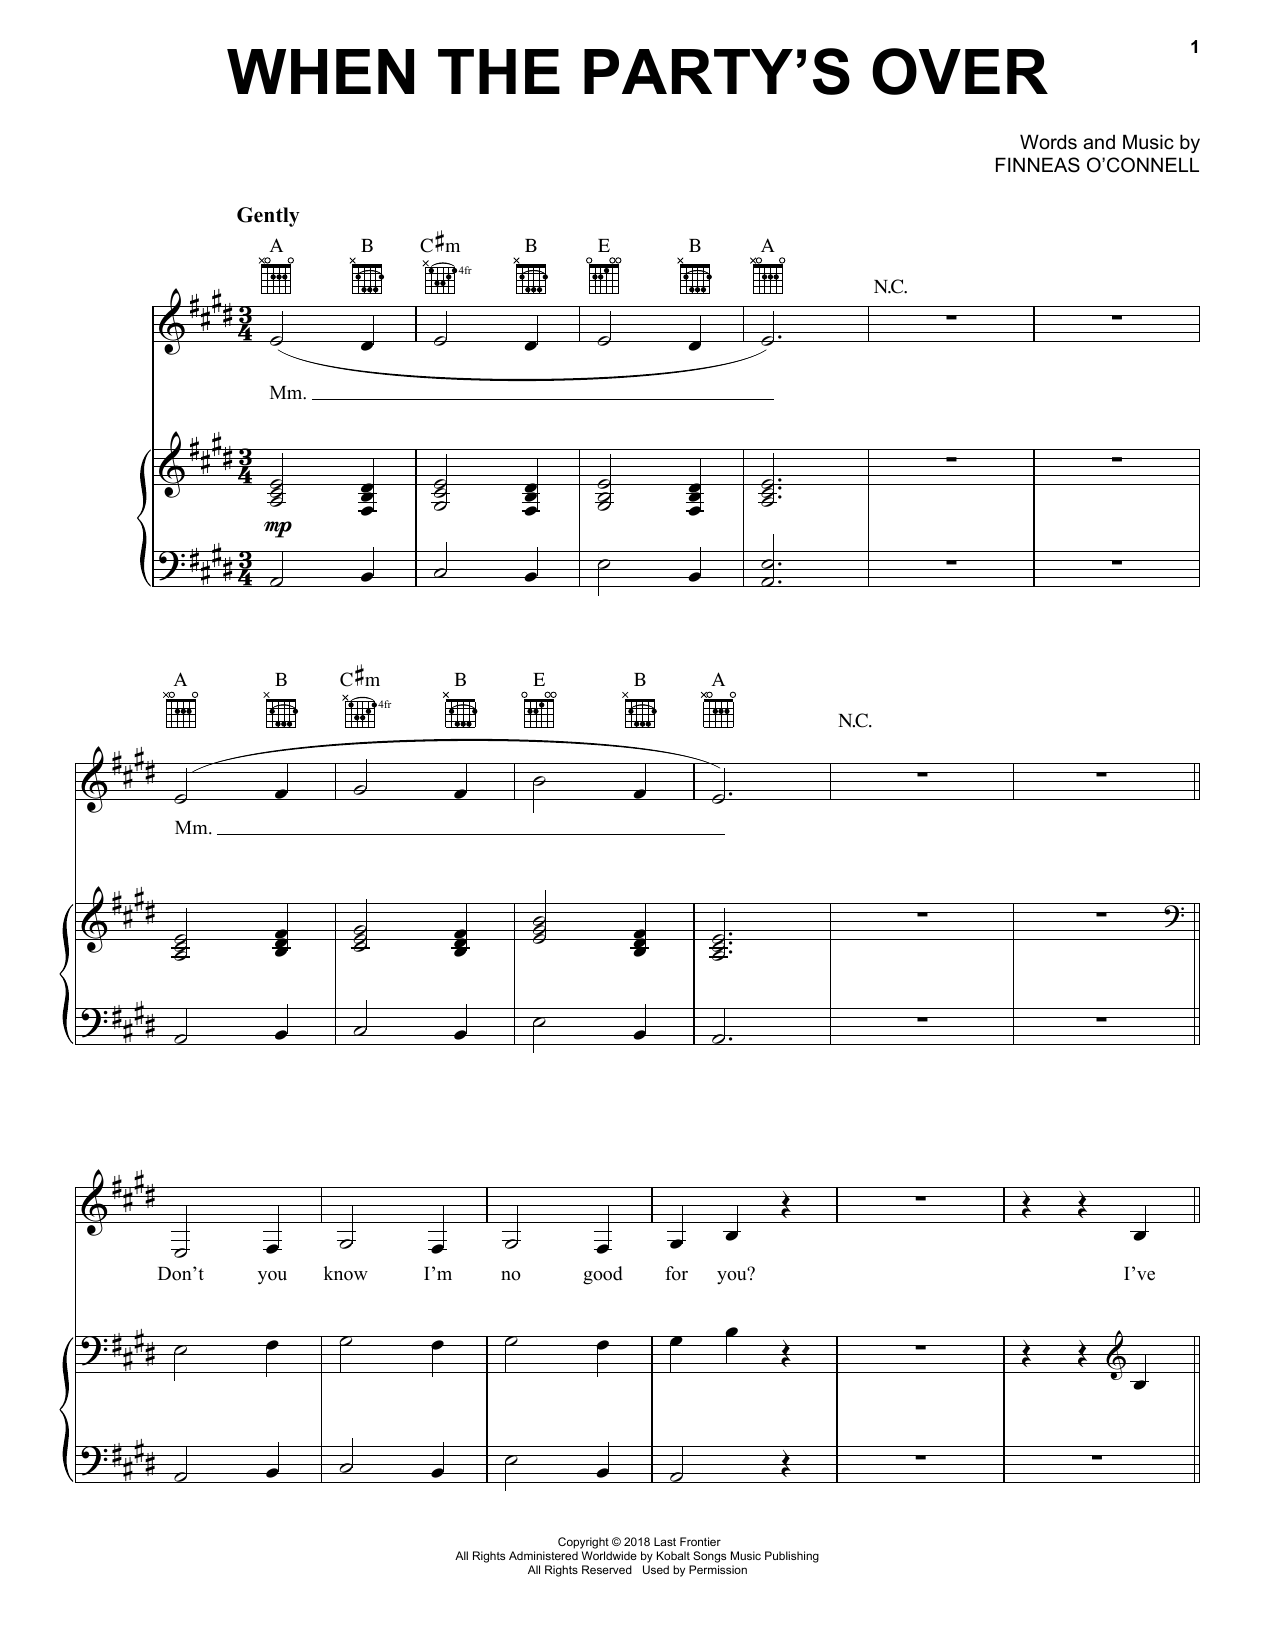 Billie Eilish when the party's over sheet music notes and chords. Download Printable PDF.